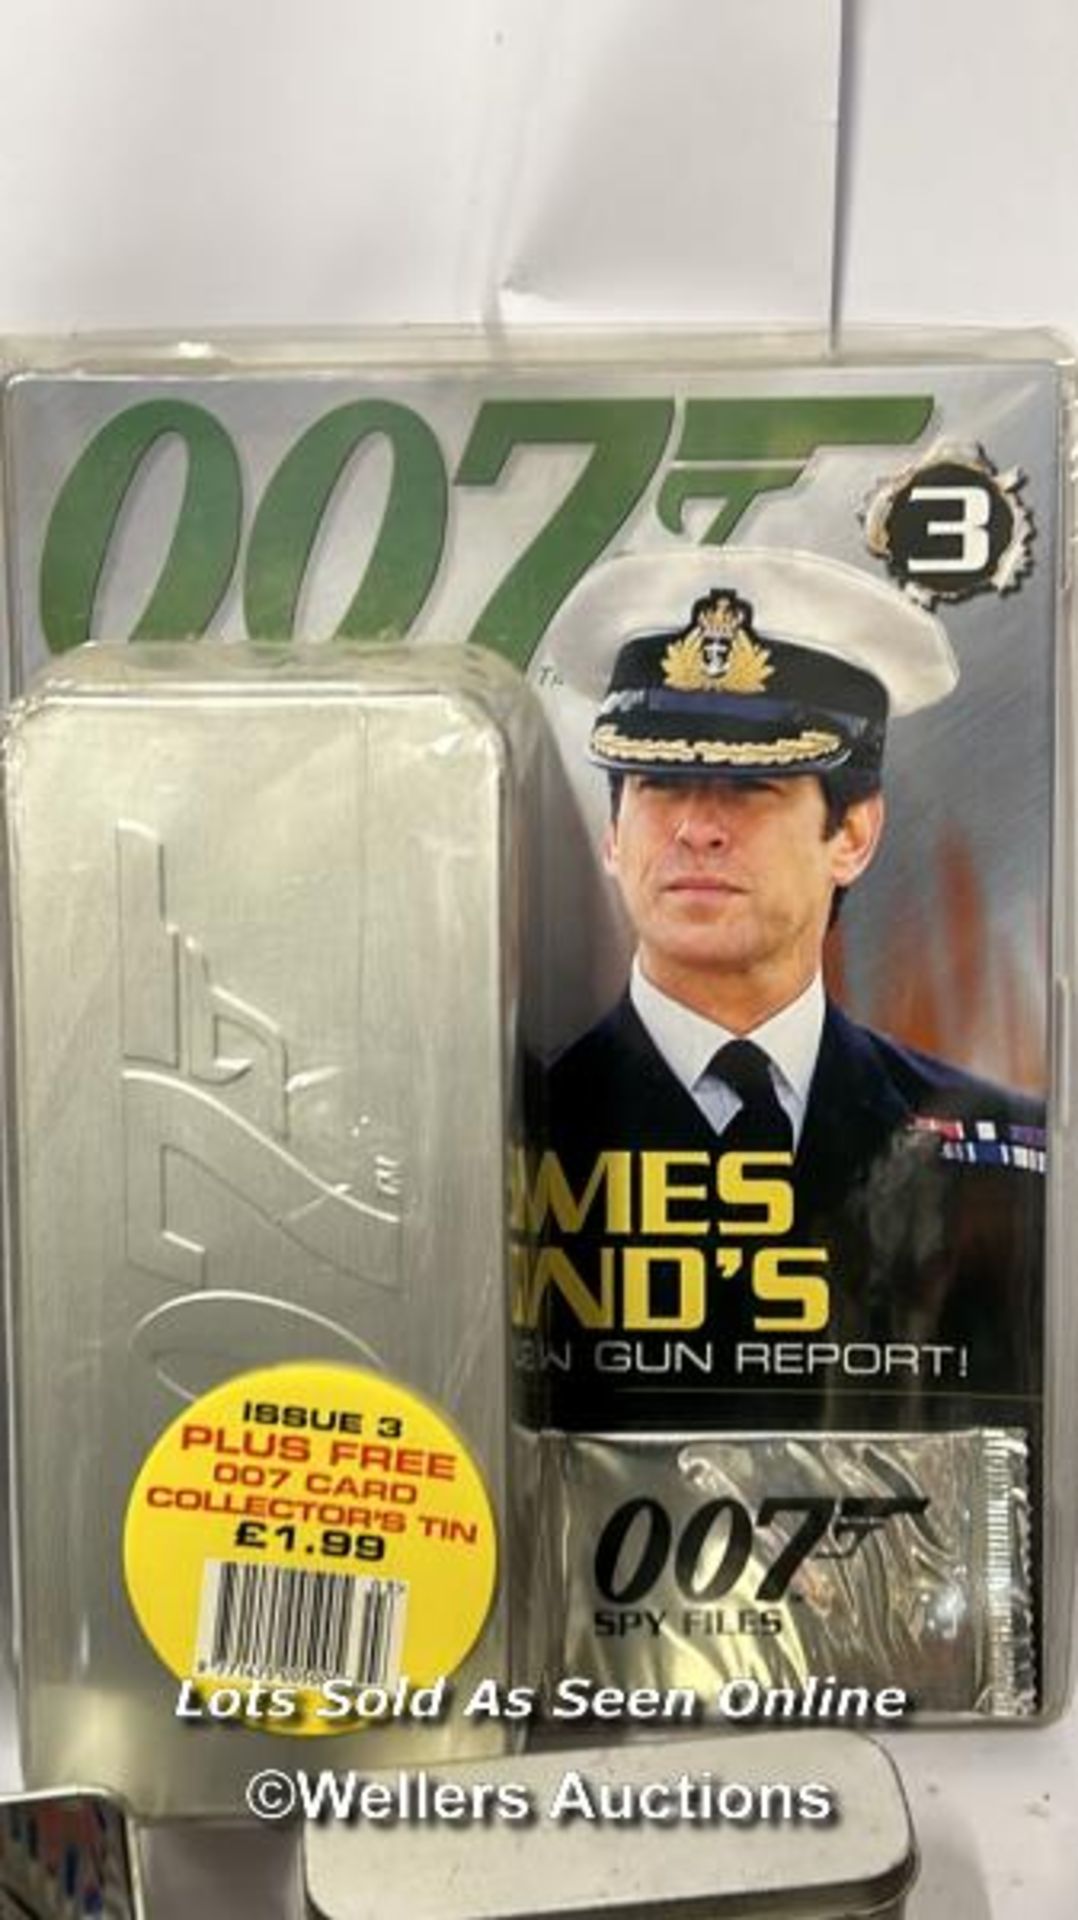 James Bond - Collectors cards, magazines, playing cards and sealed DVD box set / AN8 - Image 2 of 8